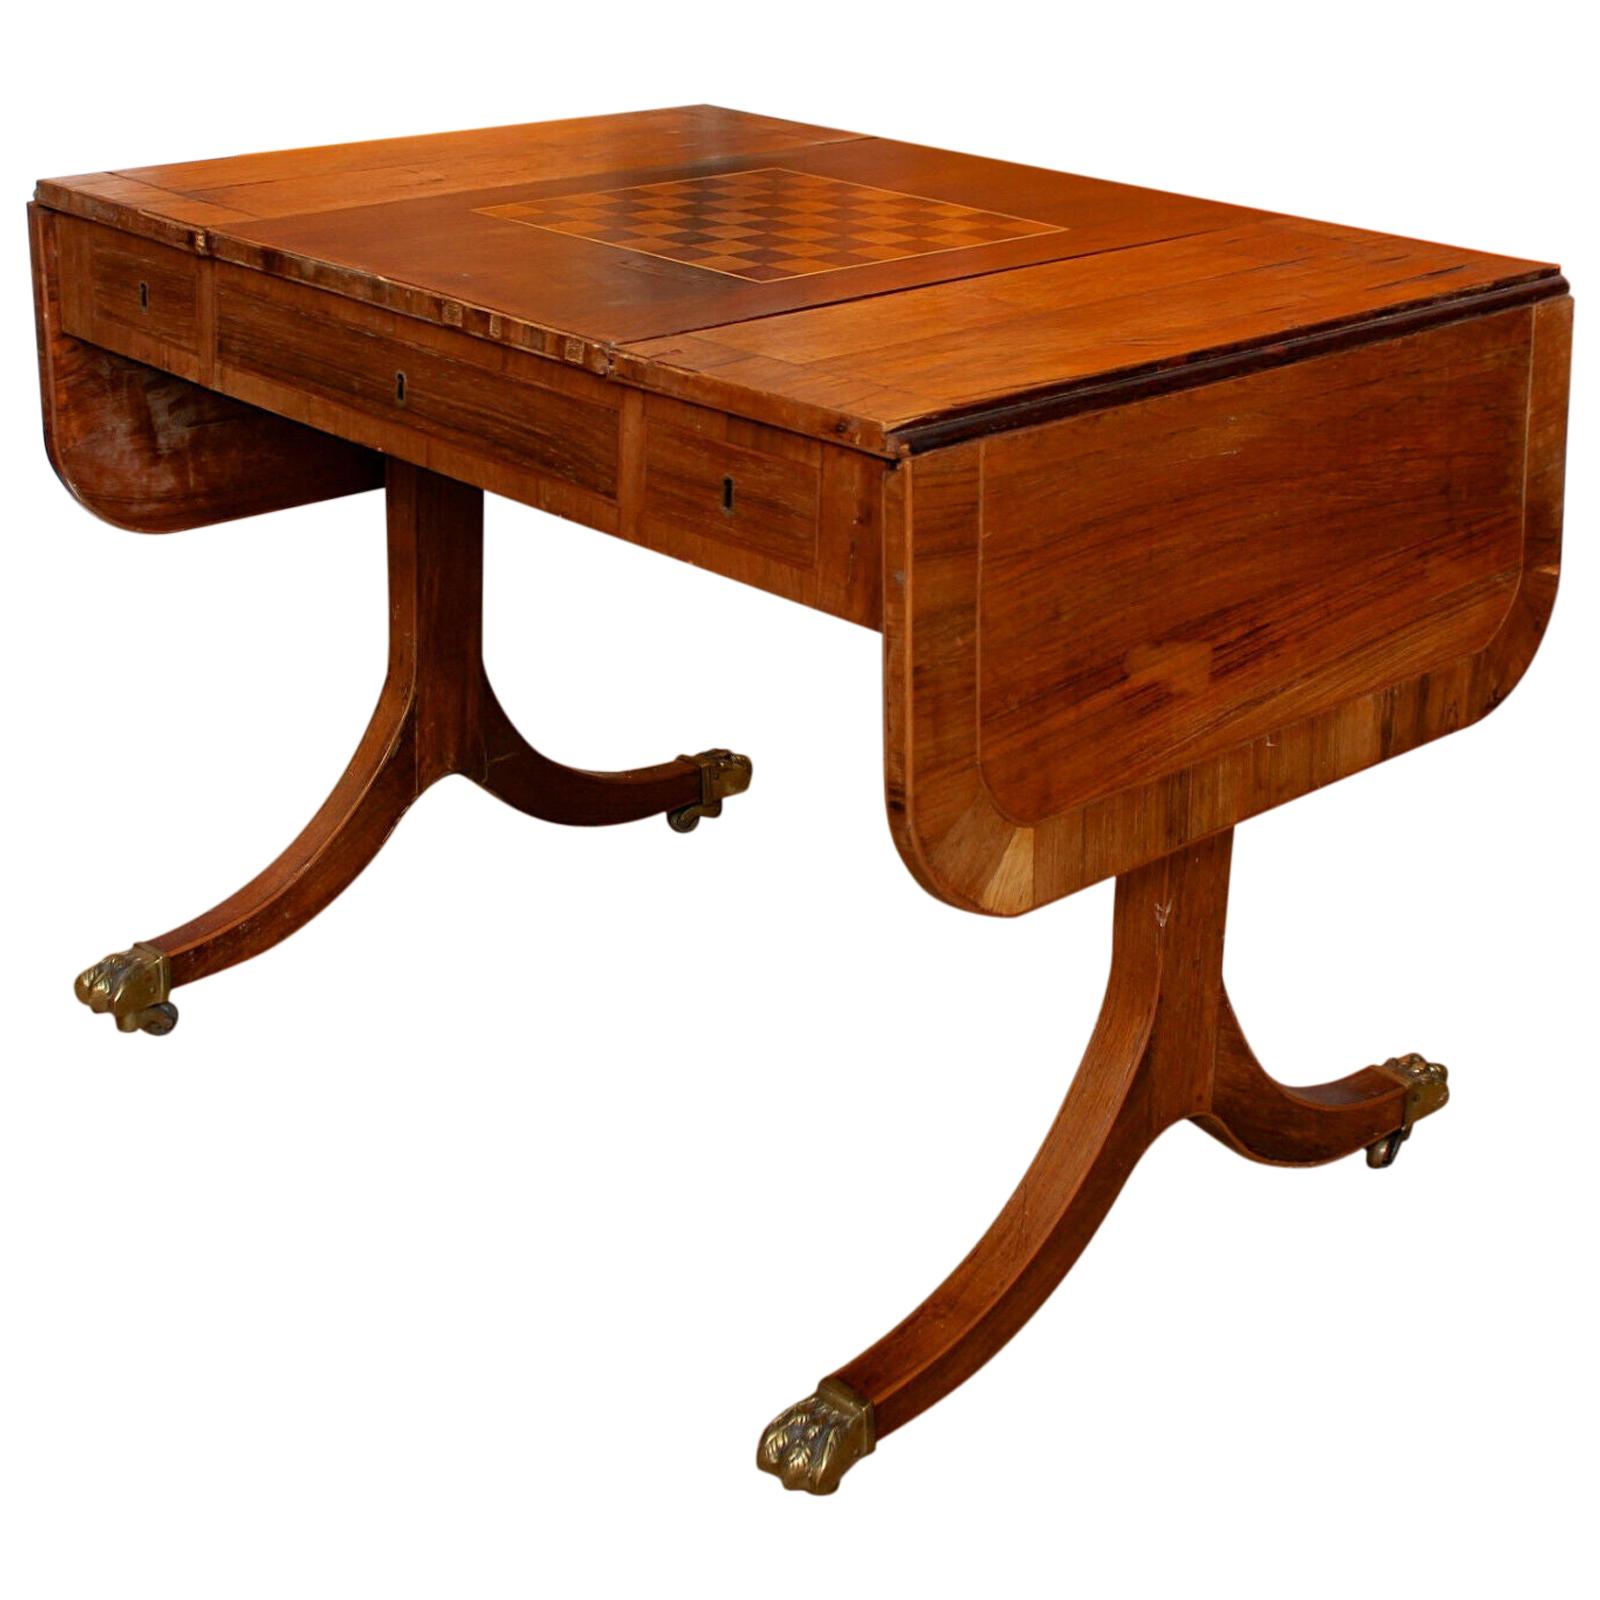 English Desk Games Sofa Table Drop-Leaf Writing Table Mahogany, 19th Century For Sale